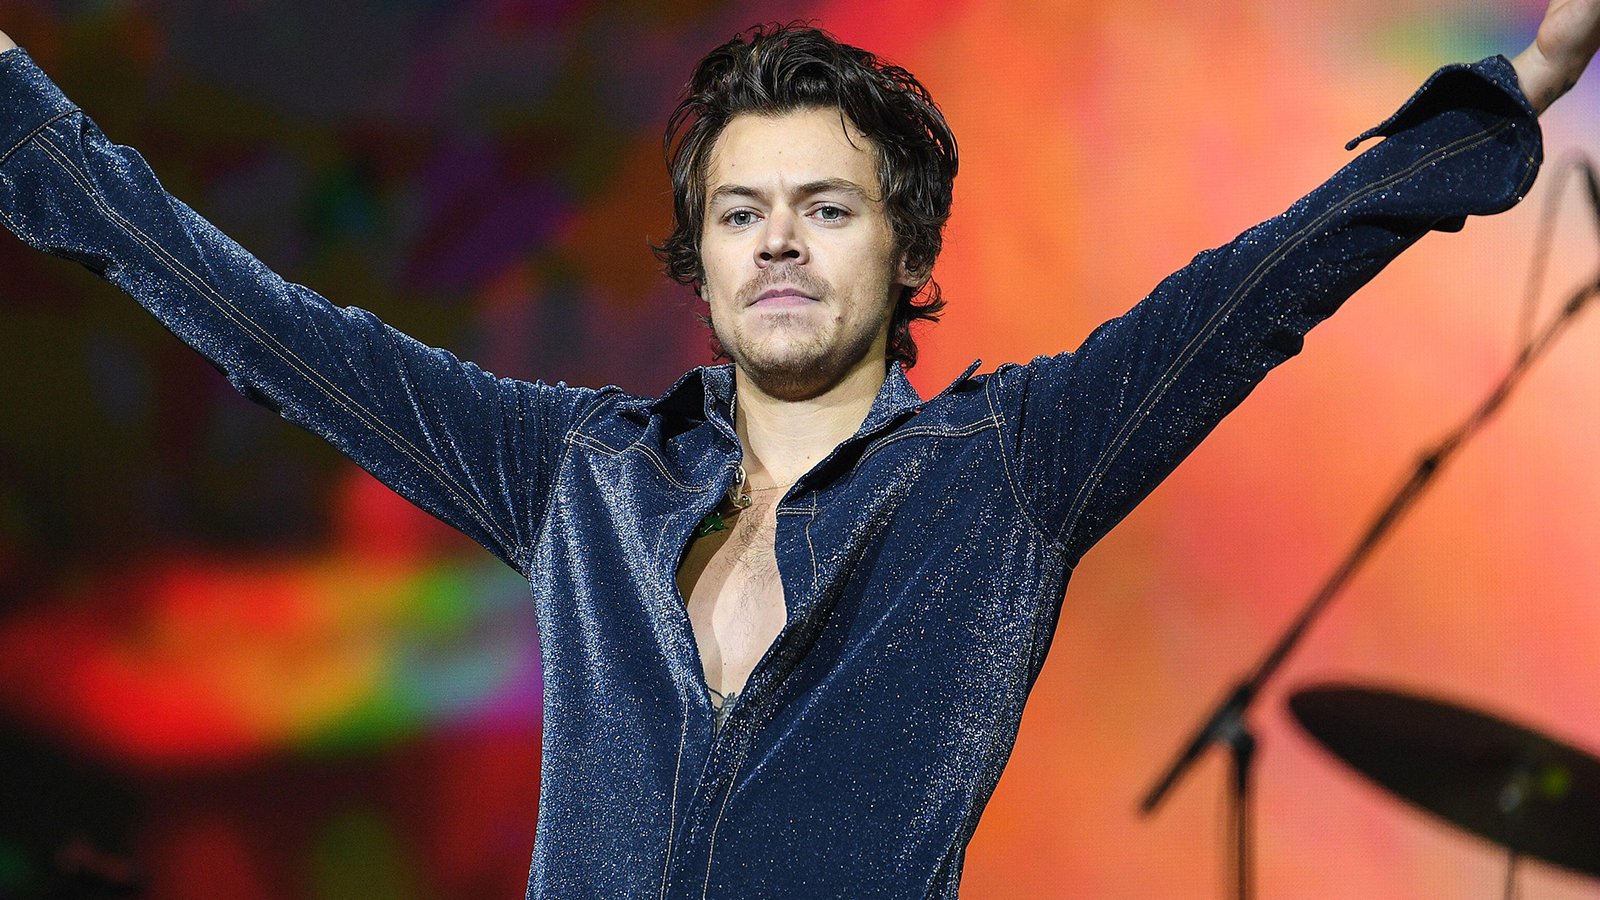 Harry Styles' World Tour Dates, Locations, and Exciting Details